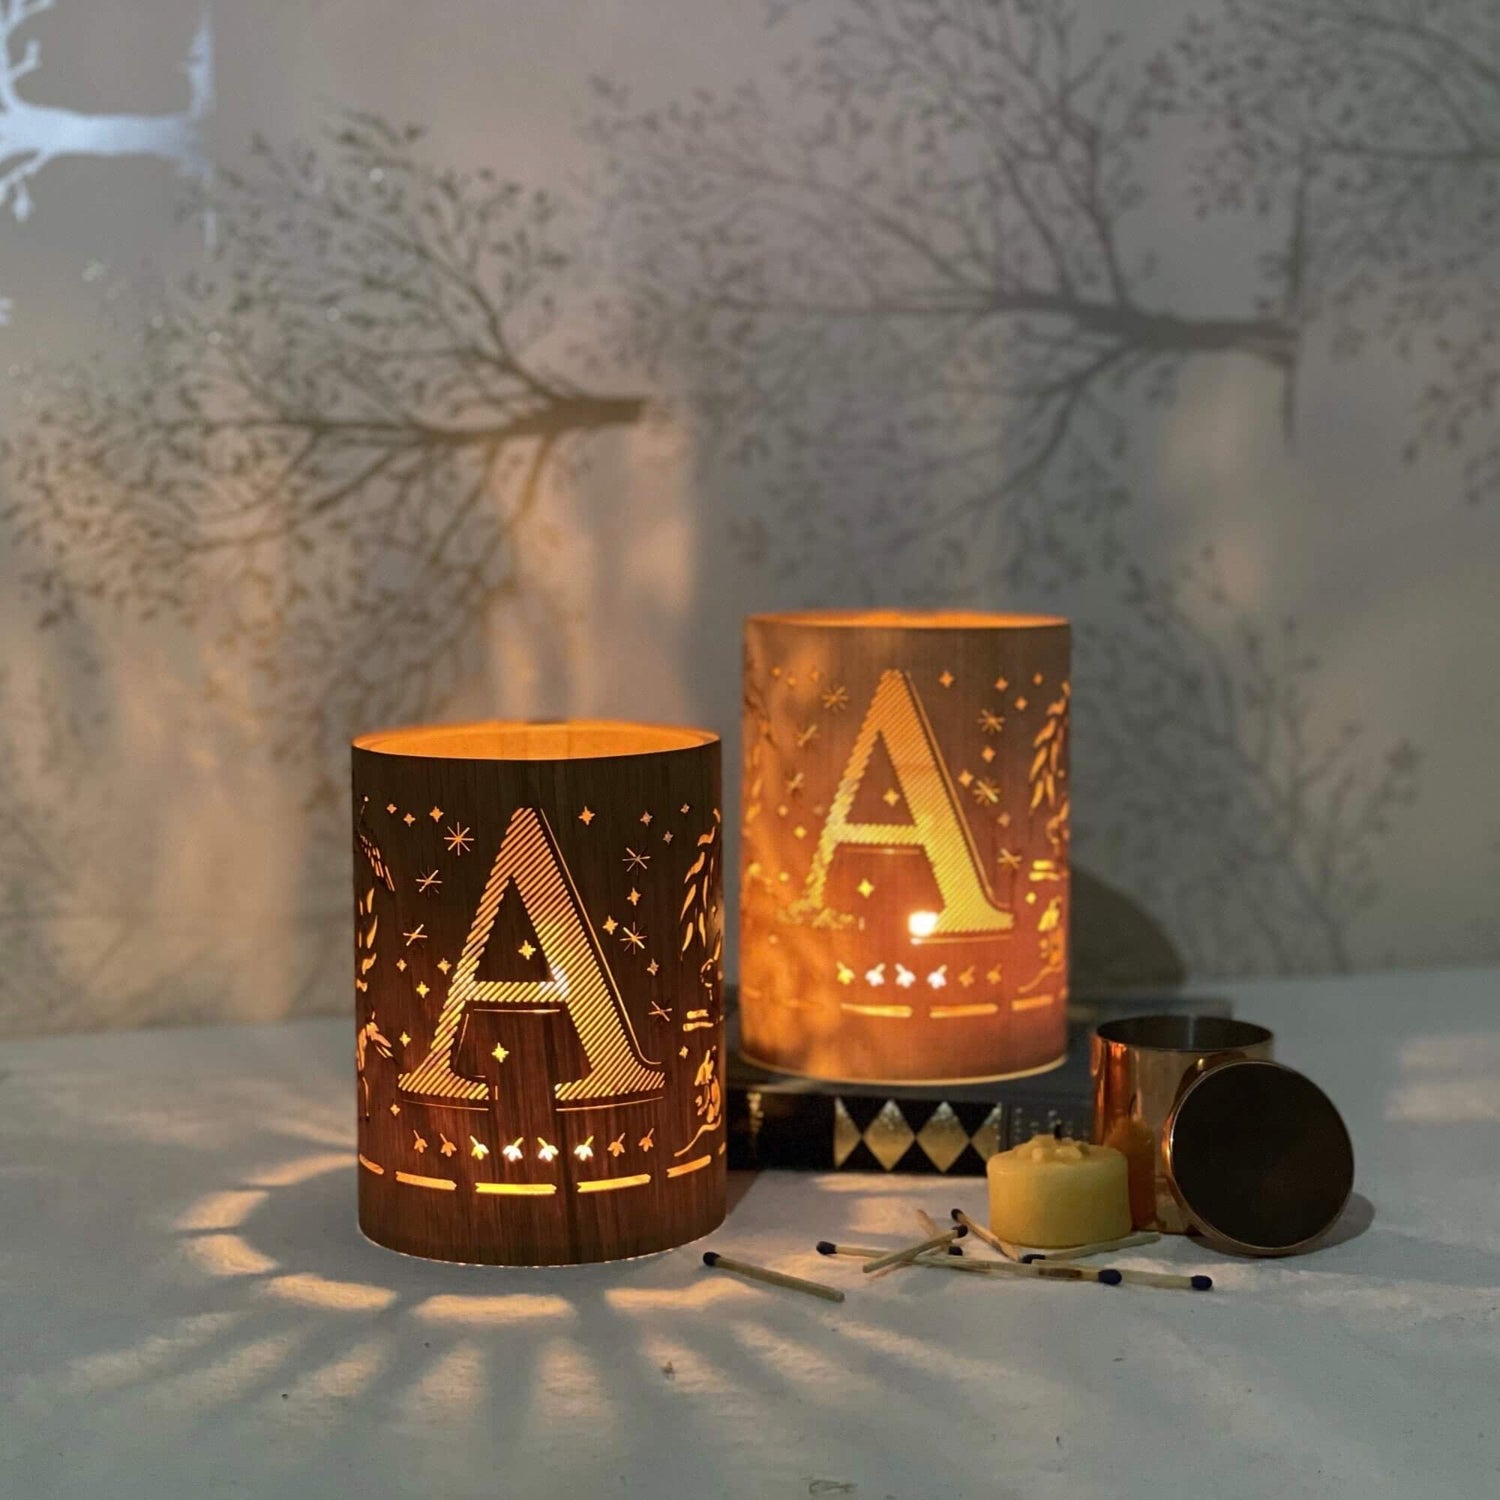 Our Carved letter monogram candle holders add the perfect touch of personality